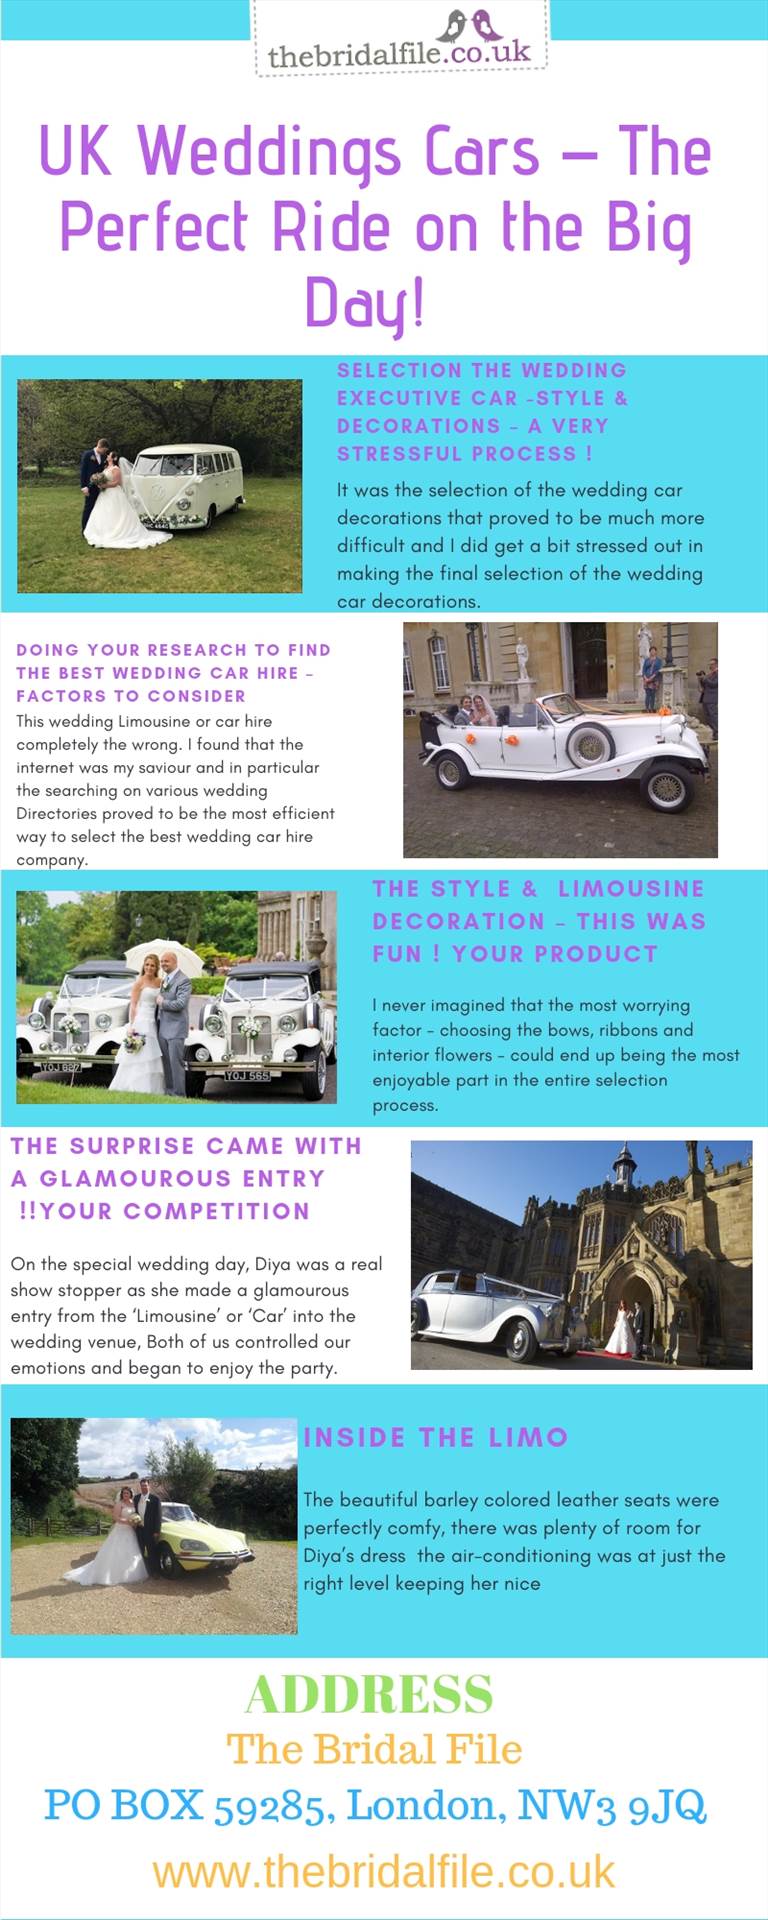 UK Weddings Cars – The Perfect Ride on the Big Day!.jpg  by thebridalfile